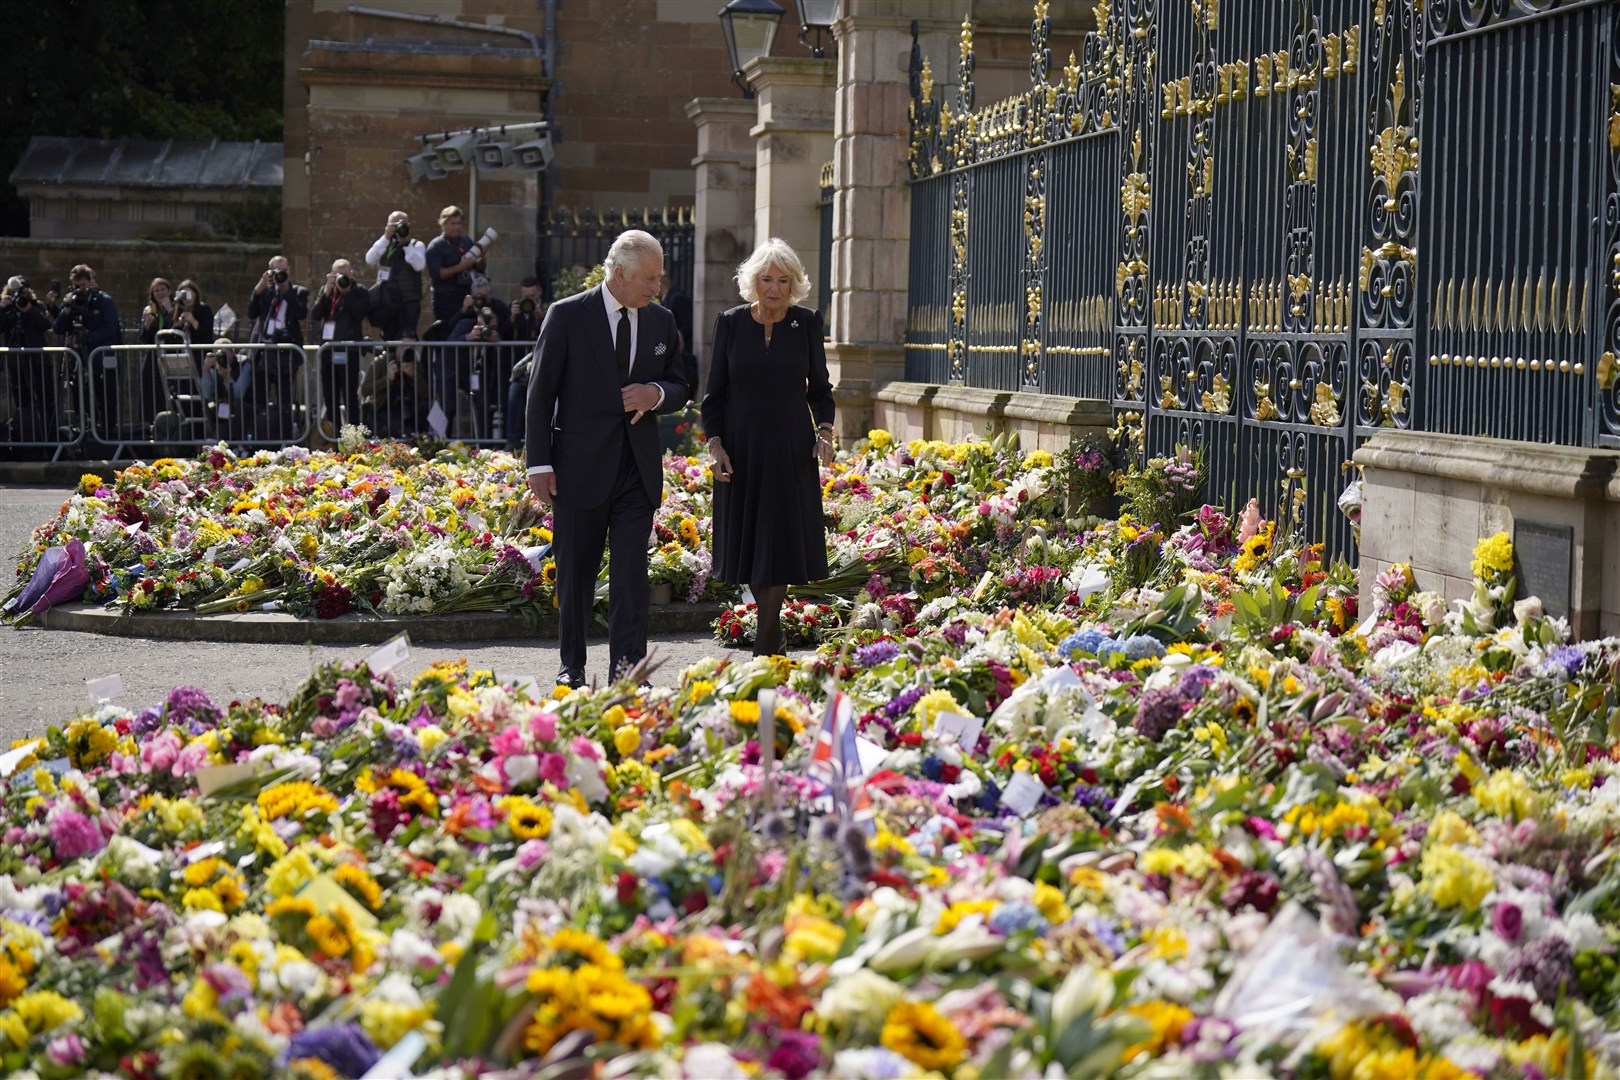 The King and the Queen Consort view floral tributes left outside Hillsborough Castle (Niall Carson/PA)